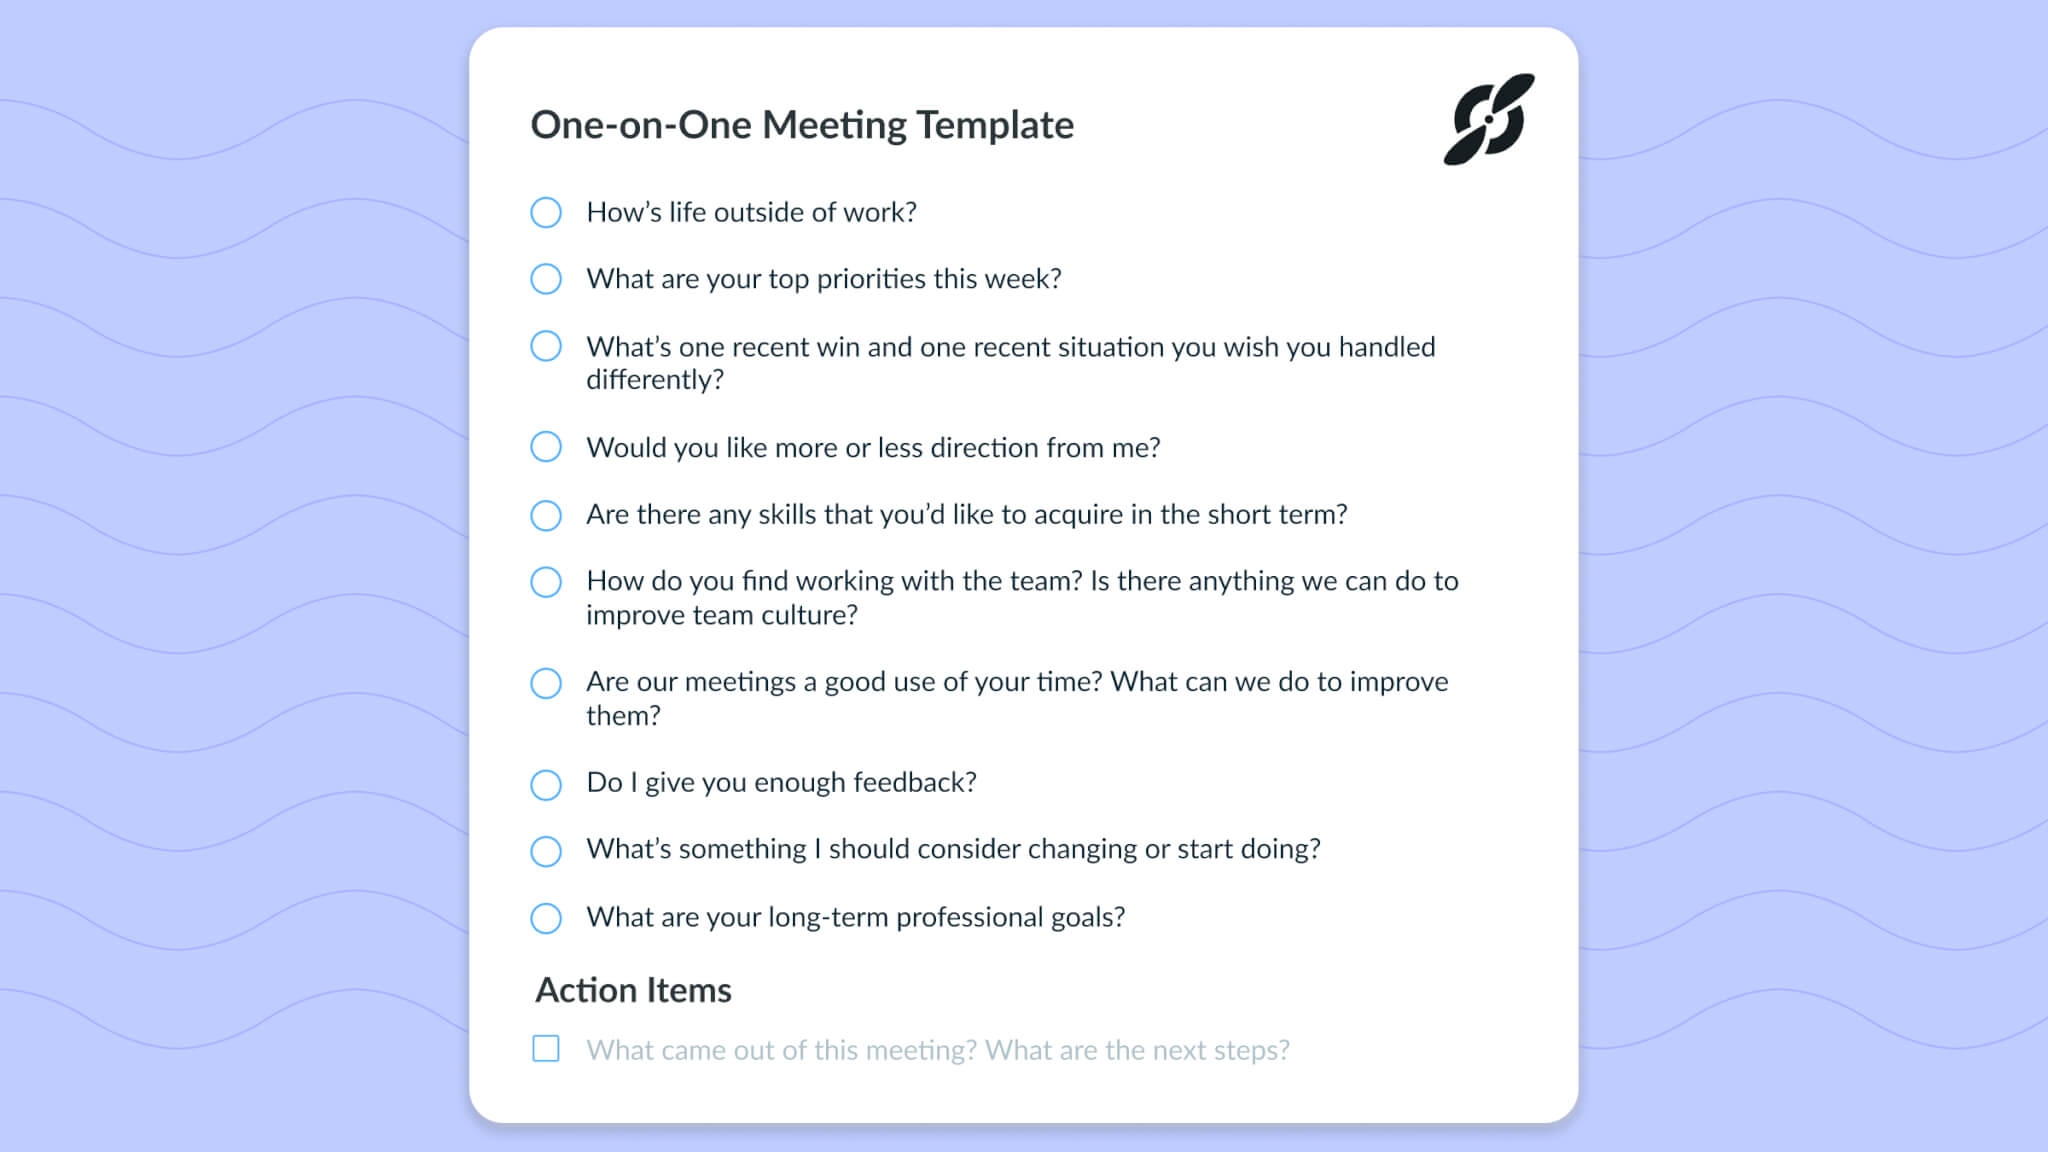 One on One Meeting Template Top 10 Questions To Ask Direct Reports